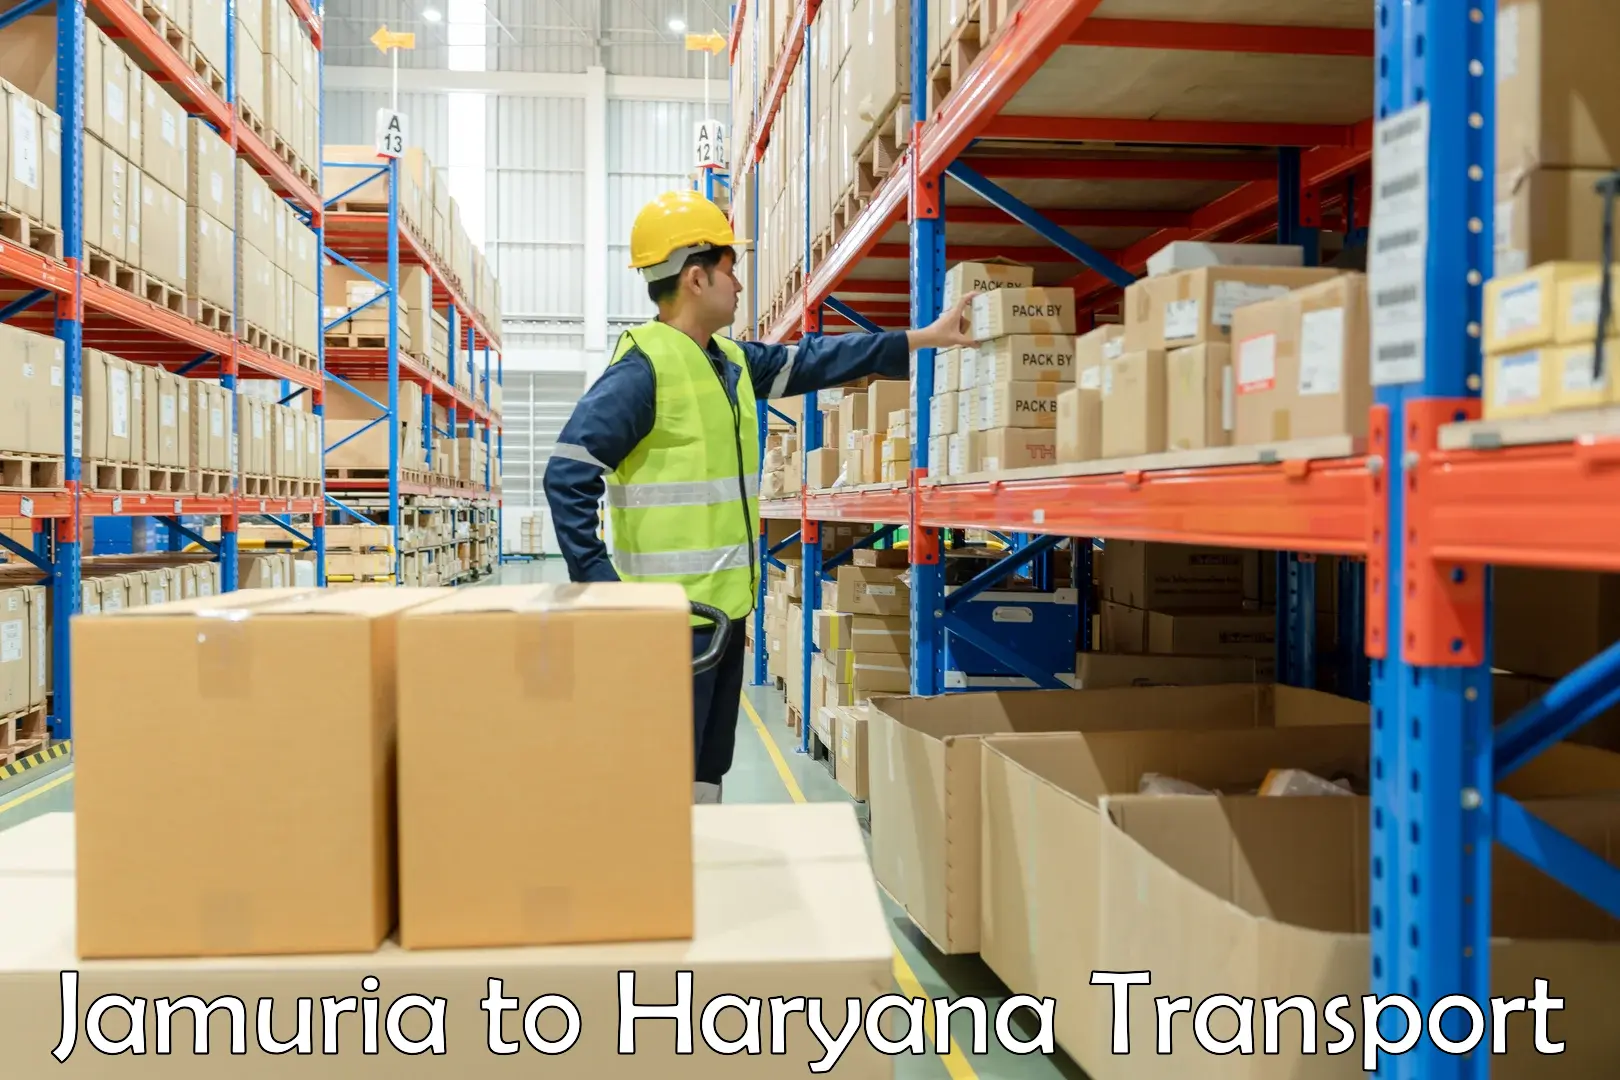 Air freight transport services Jamuria to Haryana